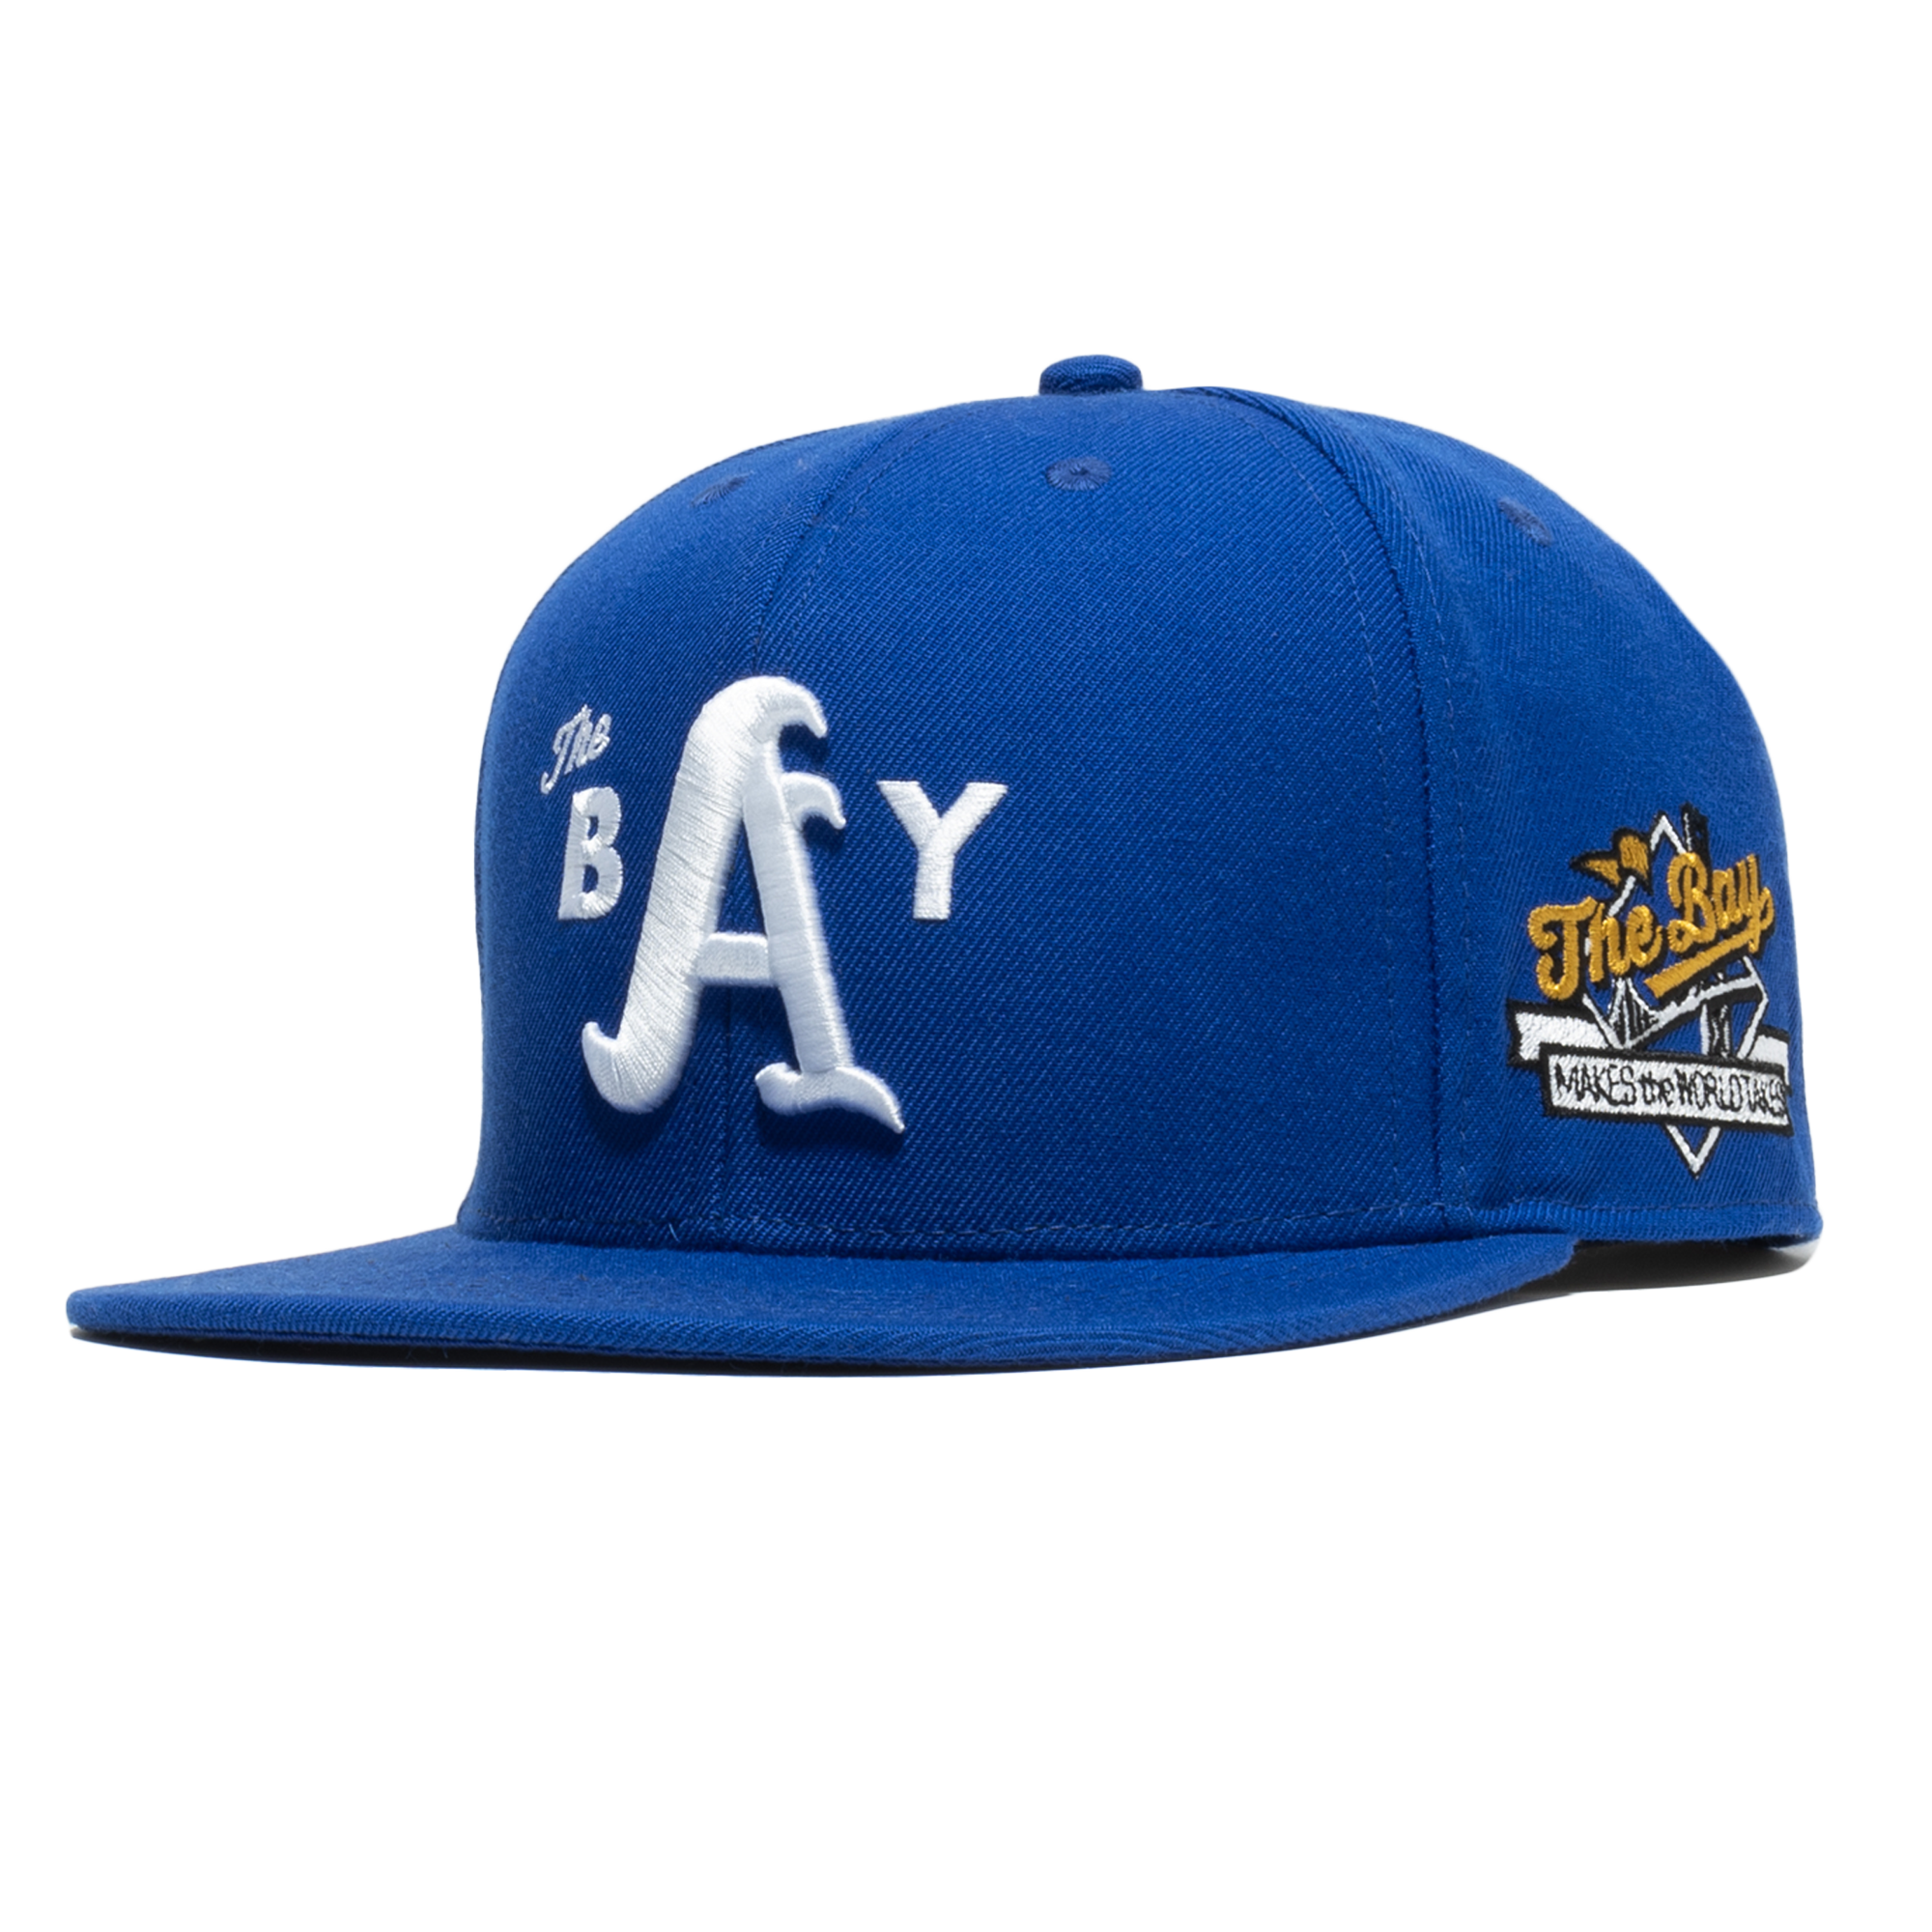 Side-angled front view of a Royal blue hat with 3D white embroidered The Bay logo on the crown & full-colored The Bay Makes, The World Takes detail on the wearer’s left side. 